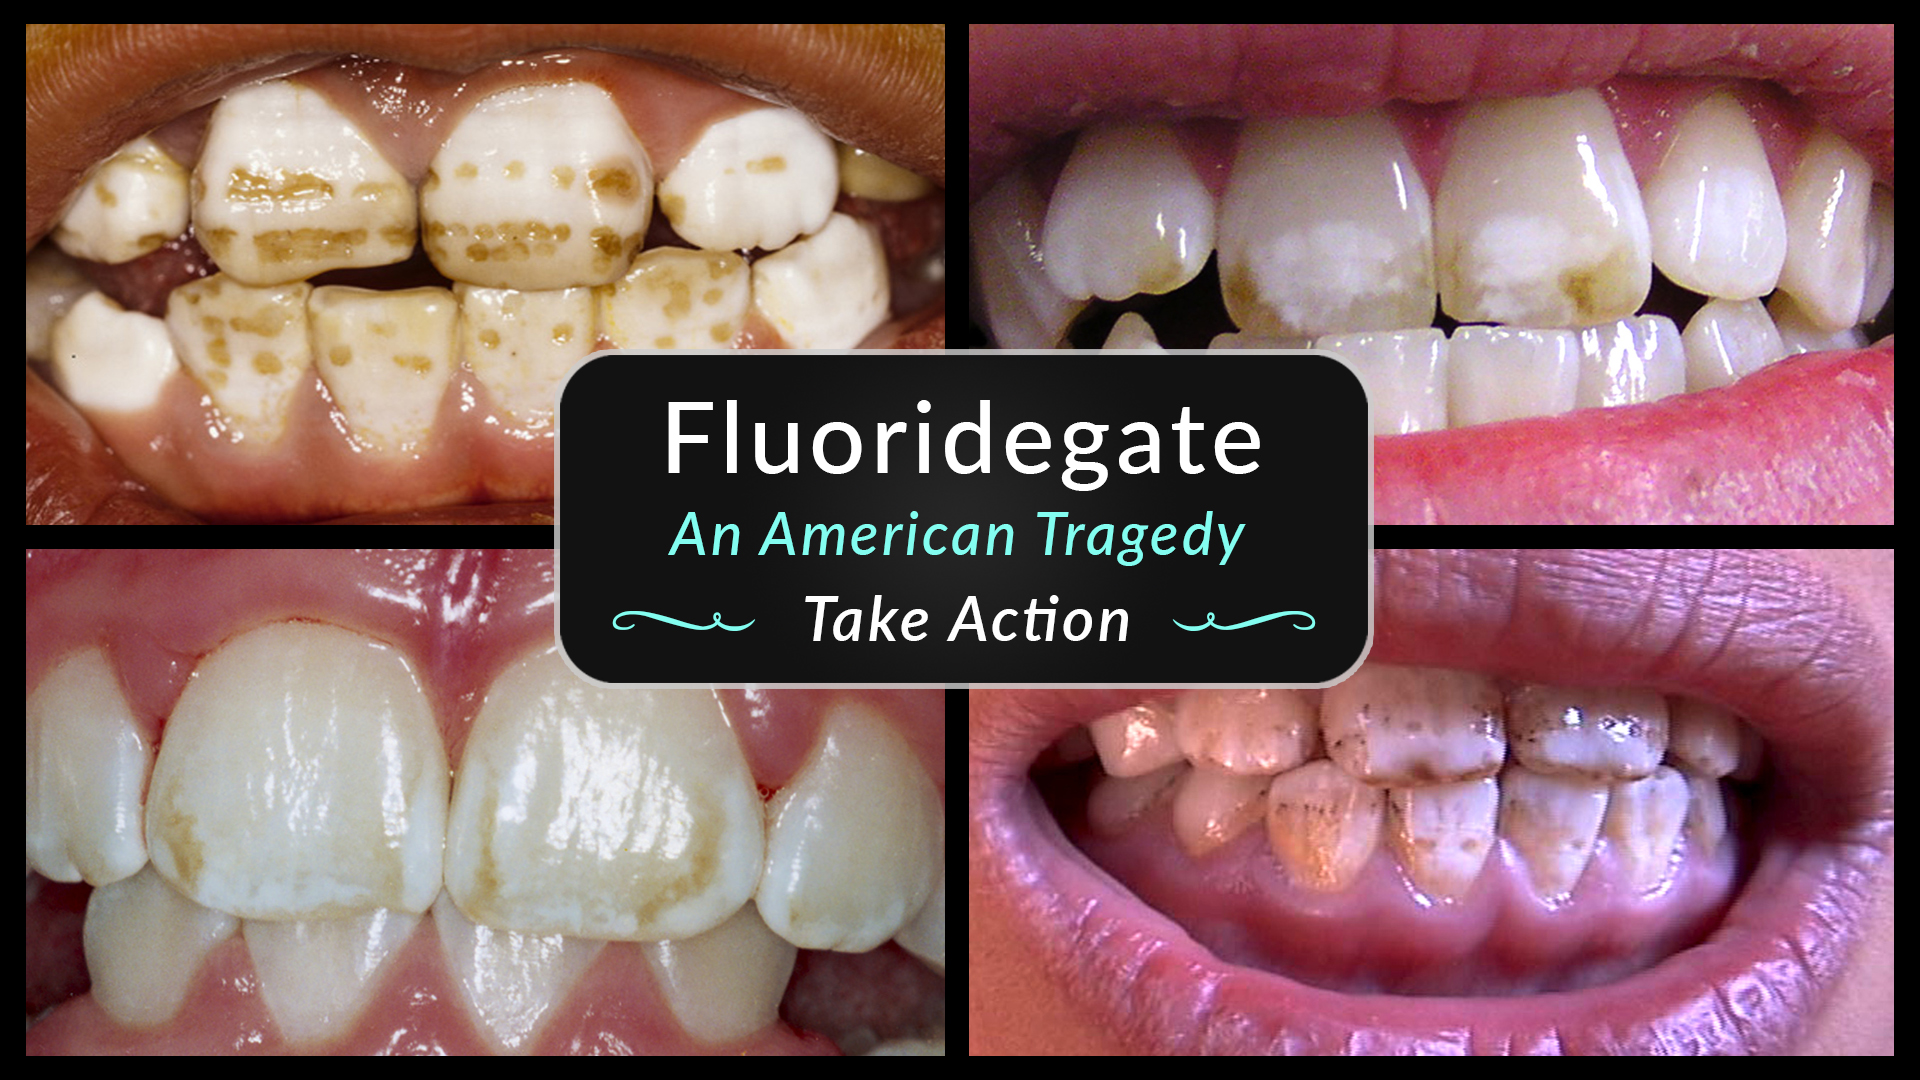 Take Action Against the use of Fluoride